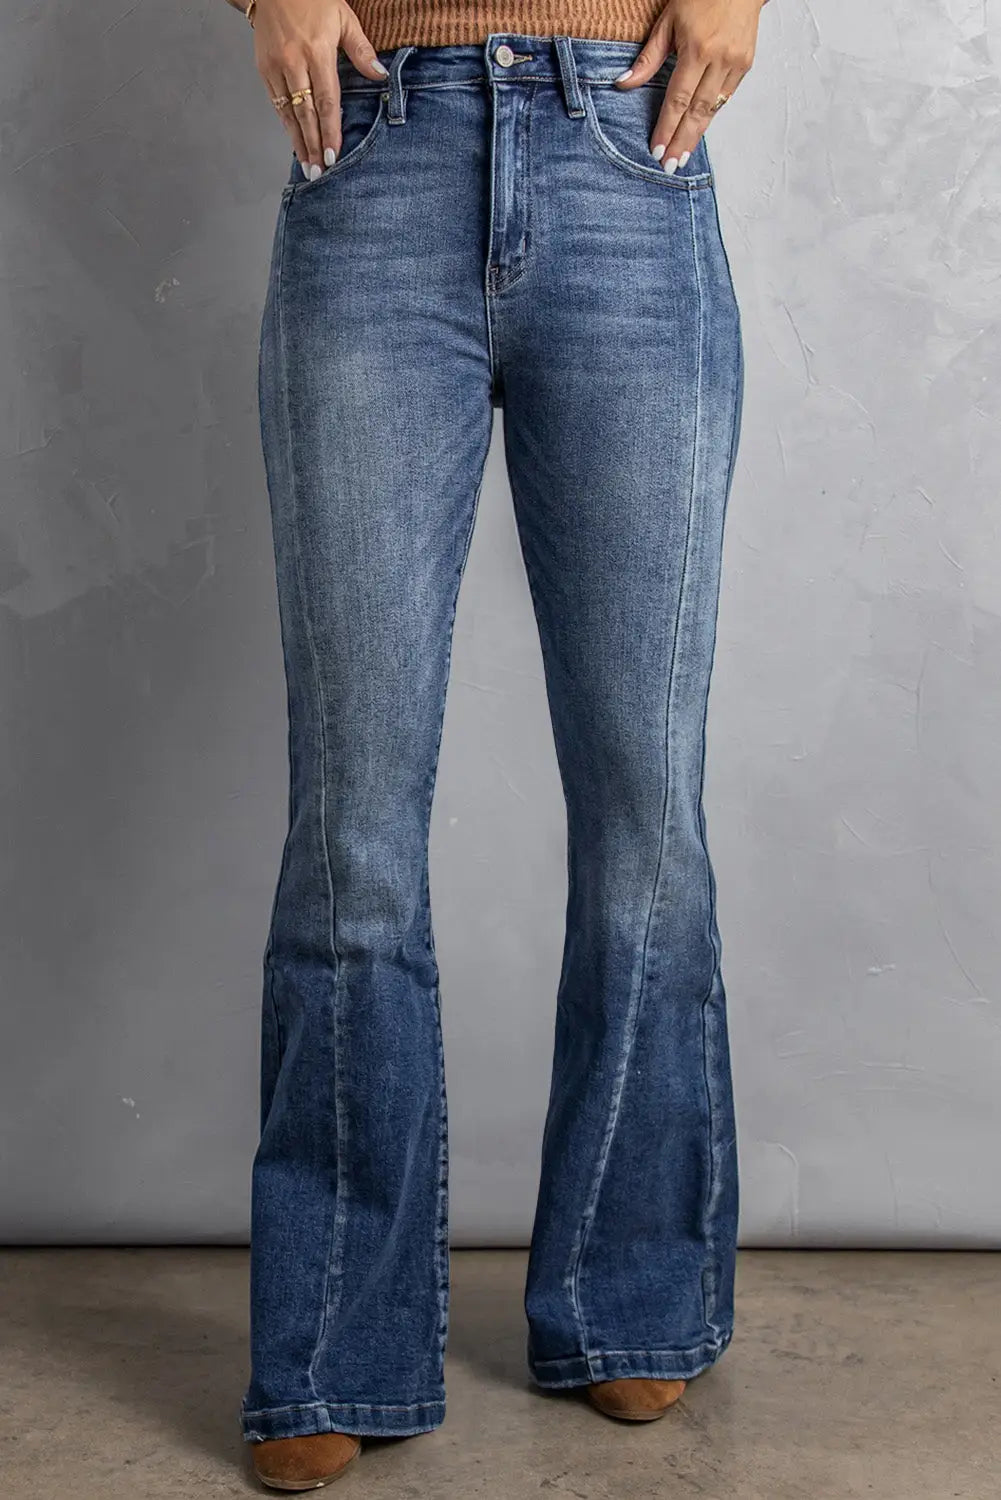 High waist flare jeans with pockets - blue / 6 68% cotton + 30% rayon + 2% elastane